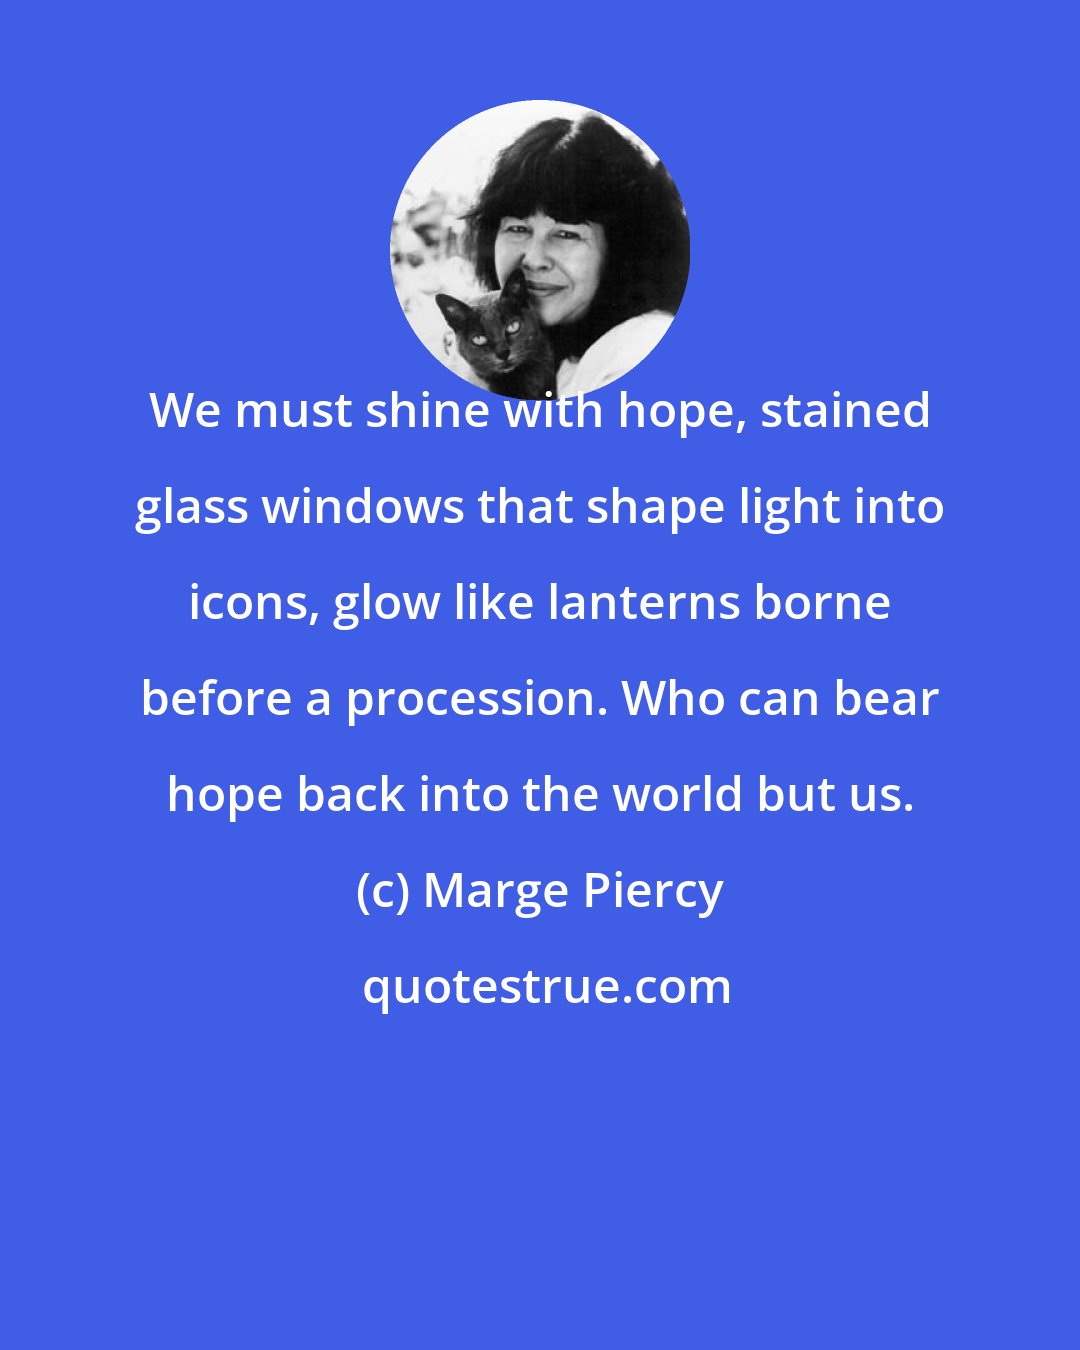 Marge Piercy: We must shine with hope, stained glass windows that shape light into icons, glow like lanterns borne before a procession. Who can bear hope back into the world but us.